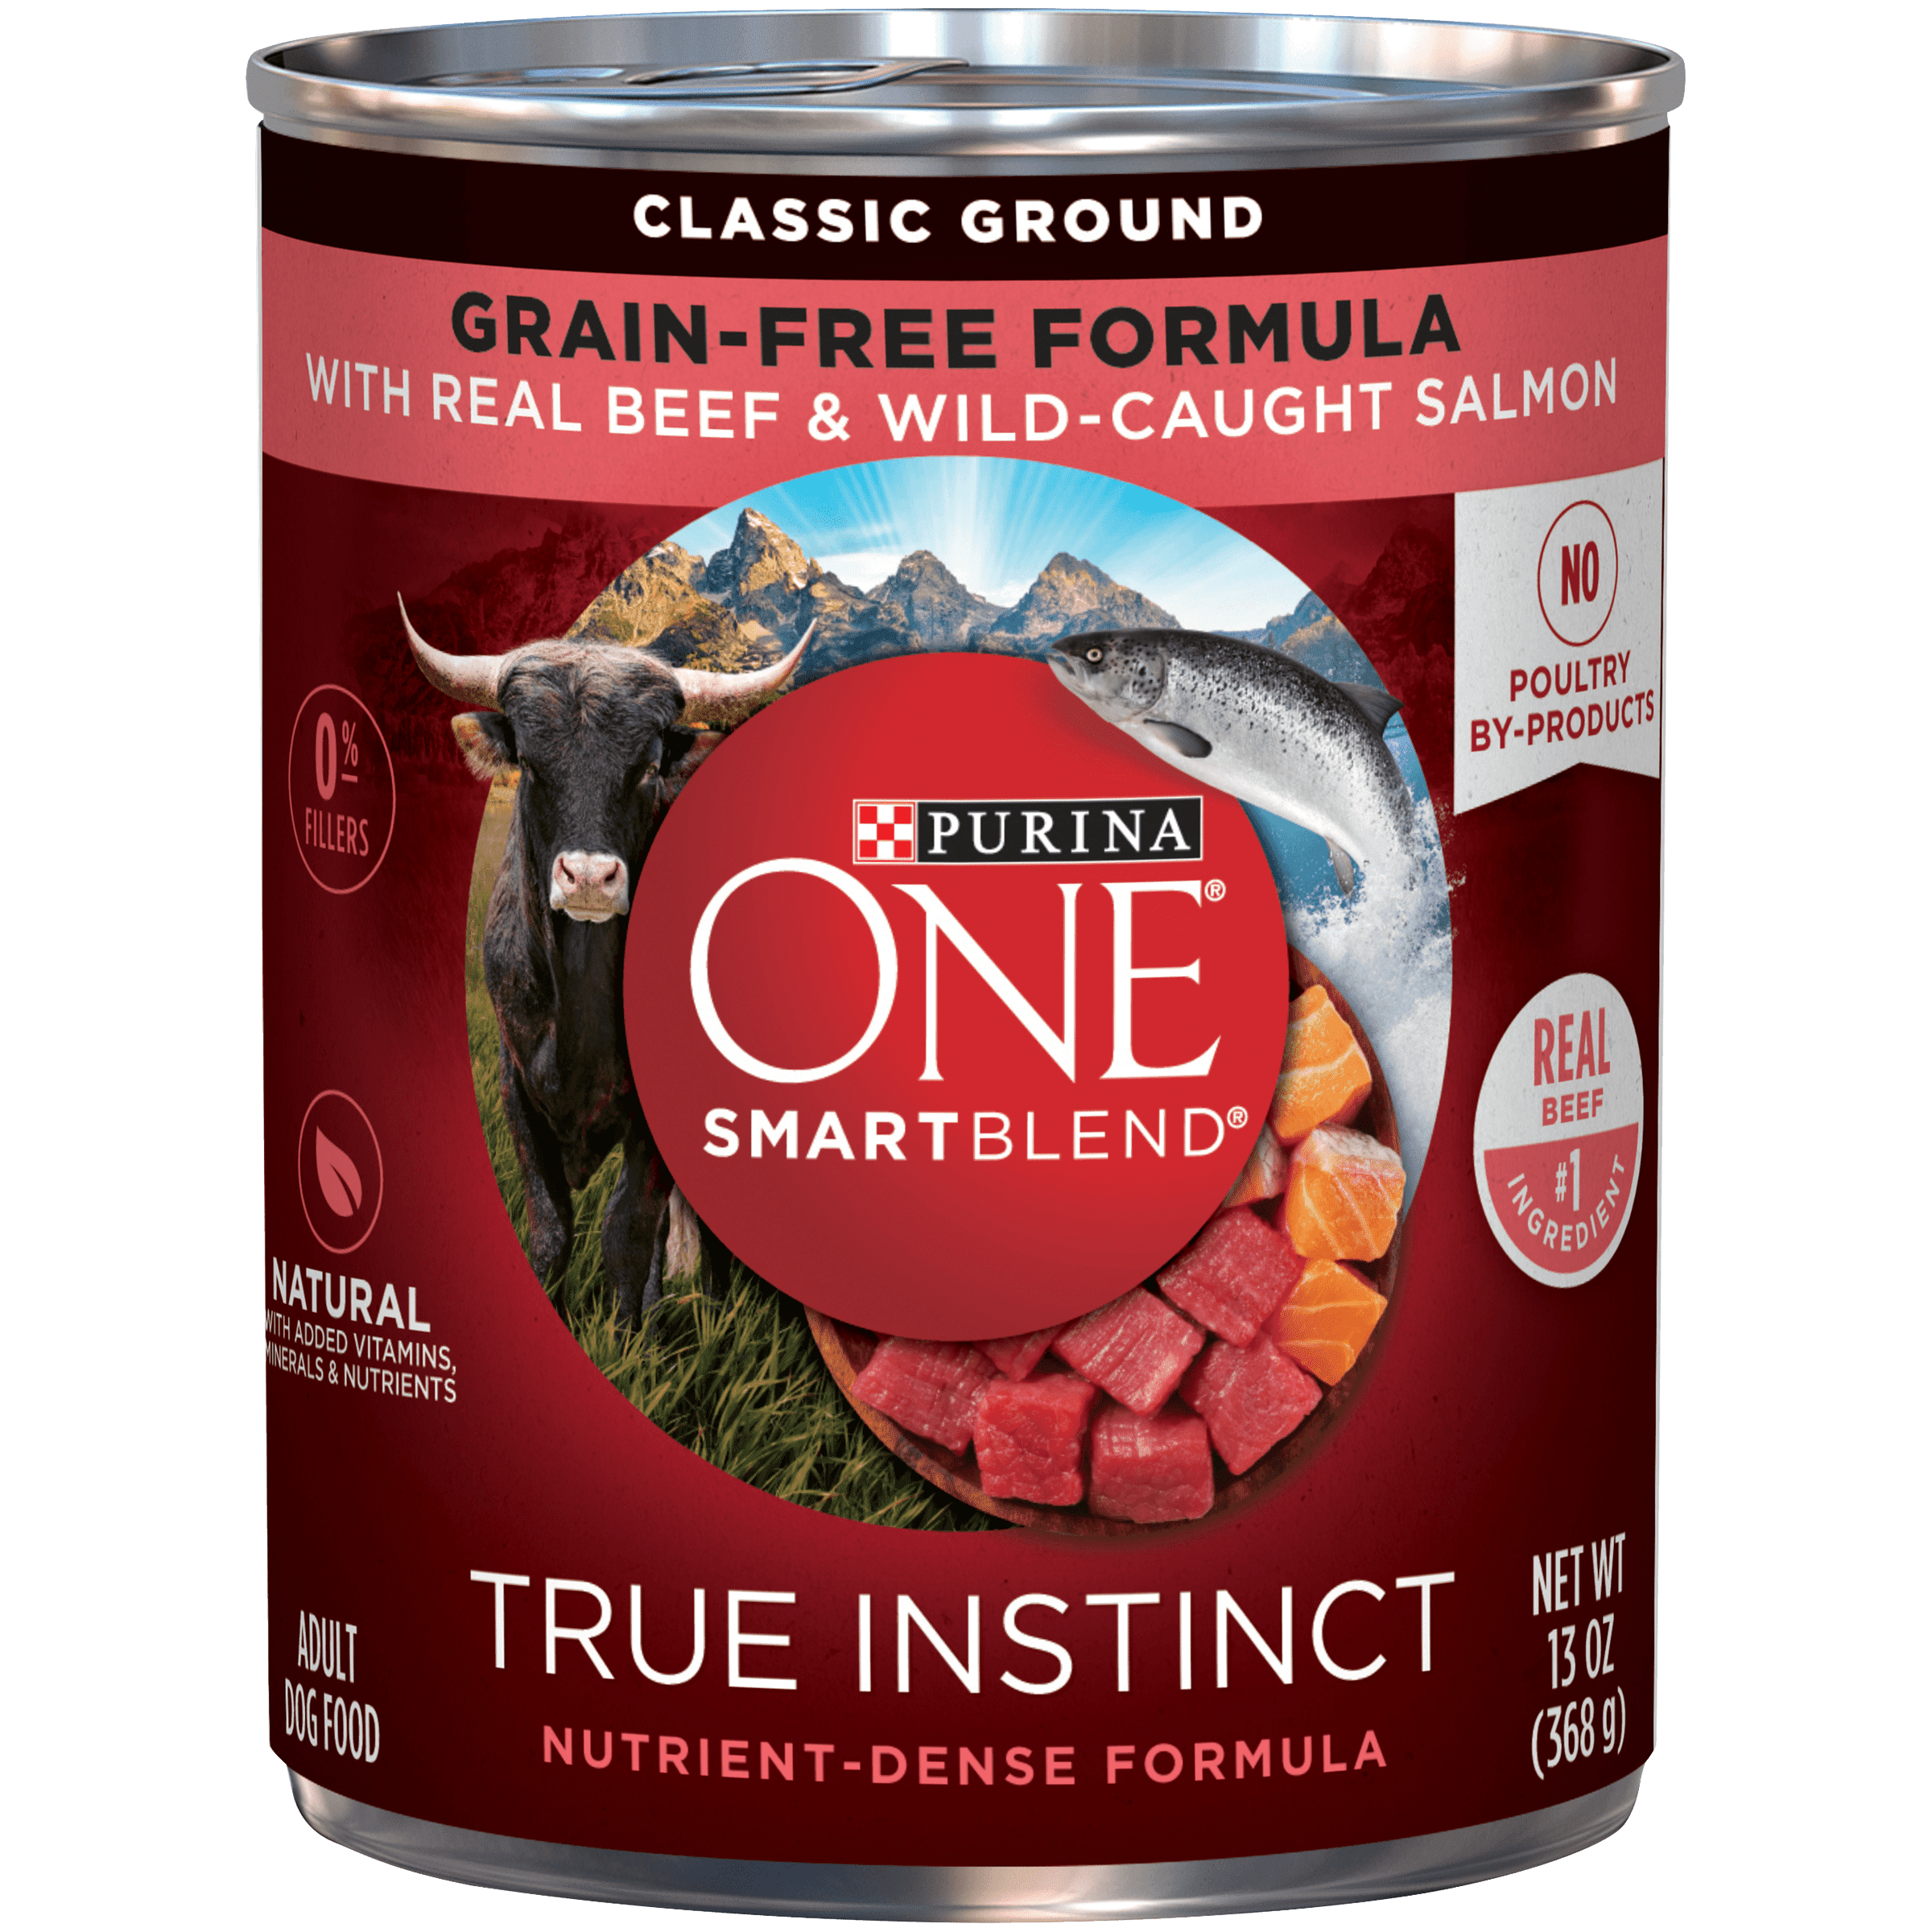 (12 Pack) Purina ONE Grain Free, Natural Pate Wet Dog Food